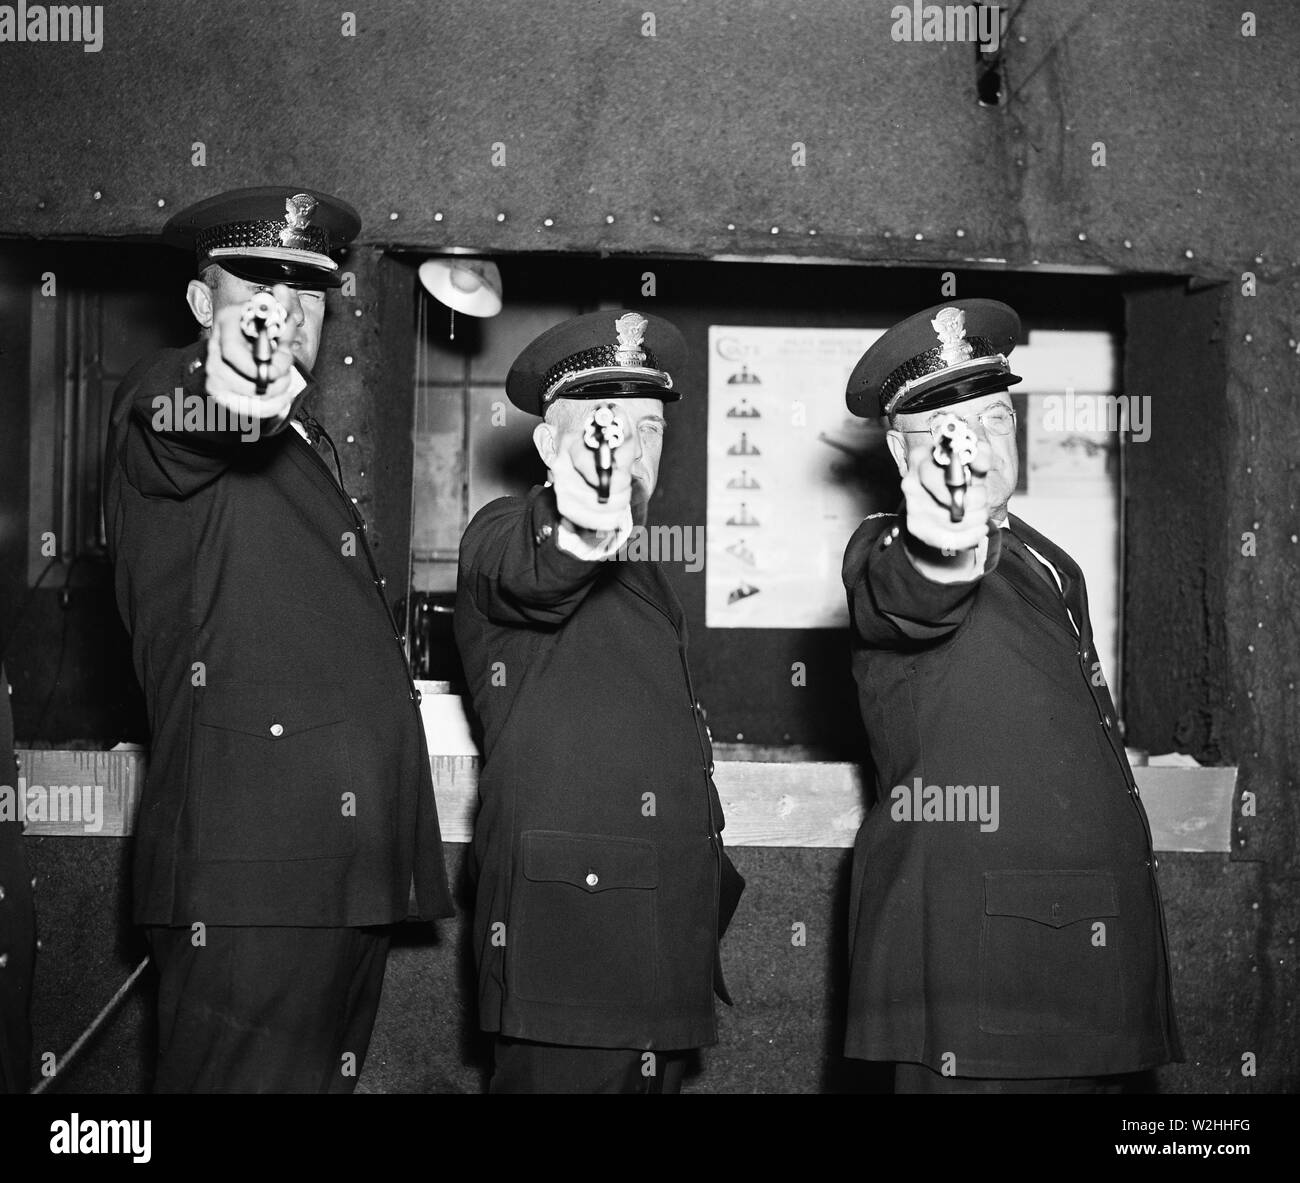 Three police officers pointing their guns (revolvers) at the photographer ca. 1936 Stock Photo